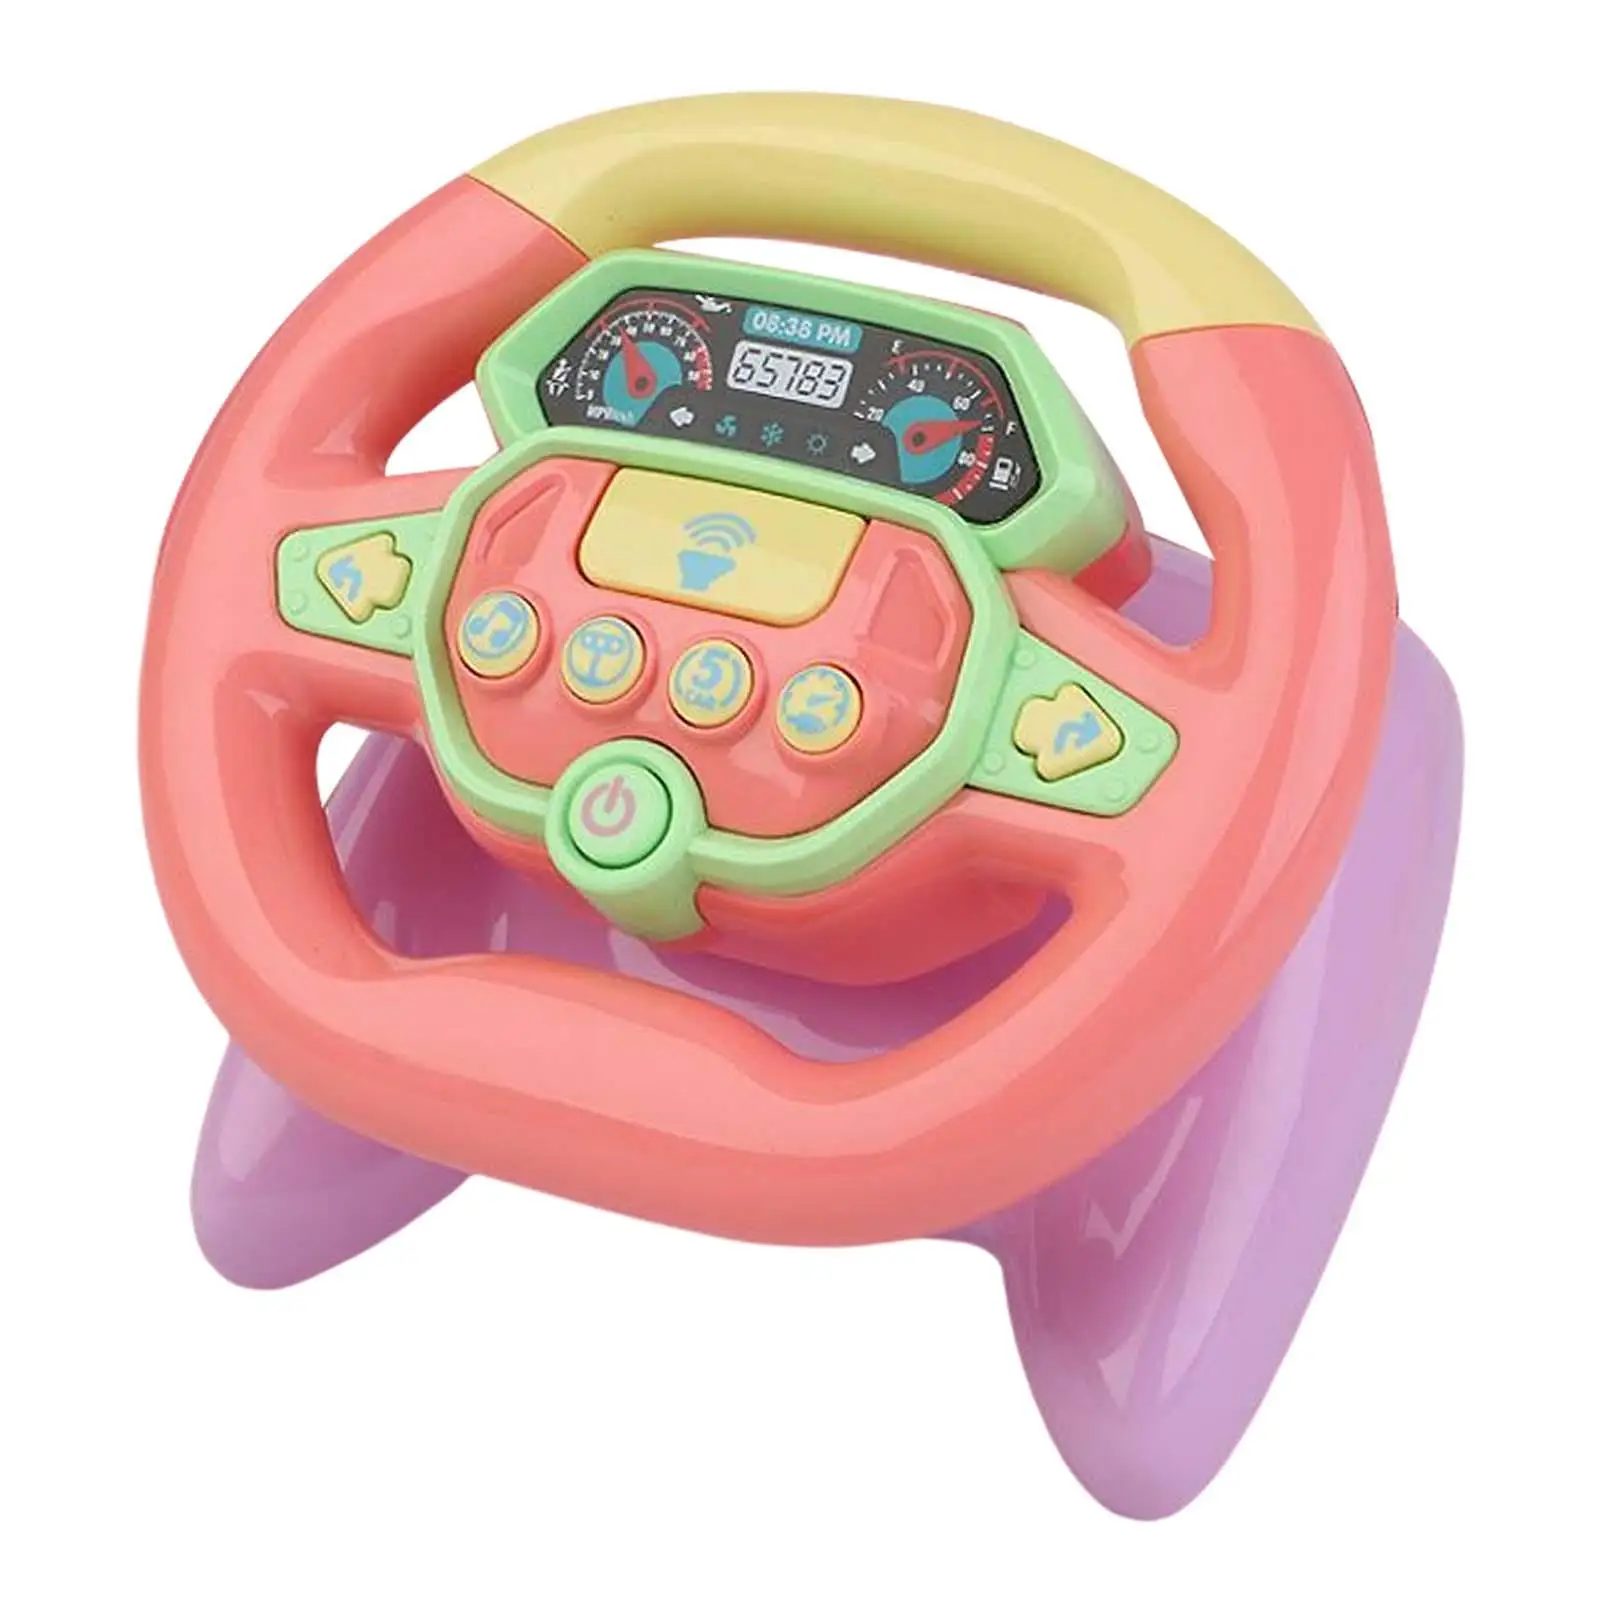 90 Degree Rotation Driving Steering Wheel Toy Educational Learning Toy Pretend